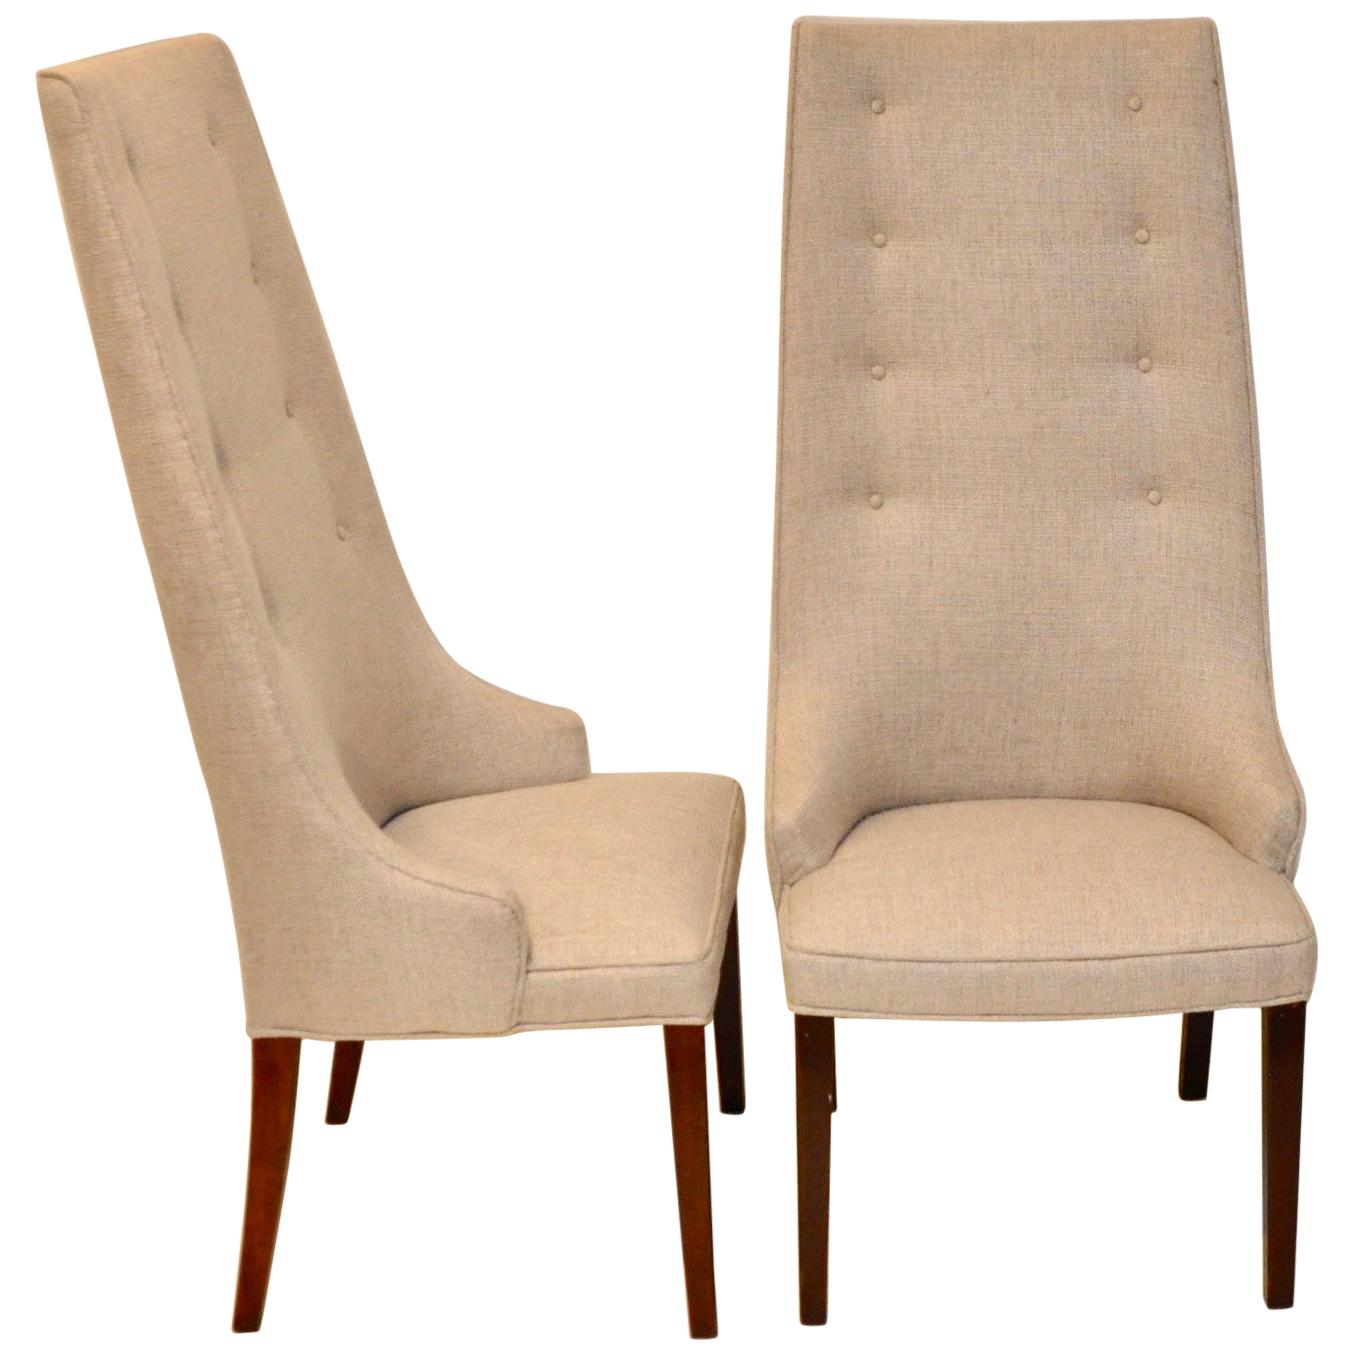 Tall Dining Chairs | Store www.spora.ws